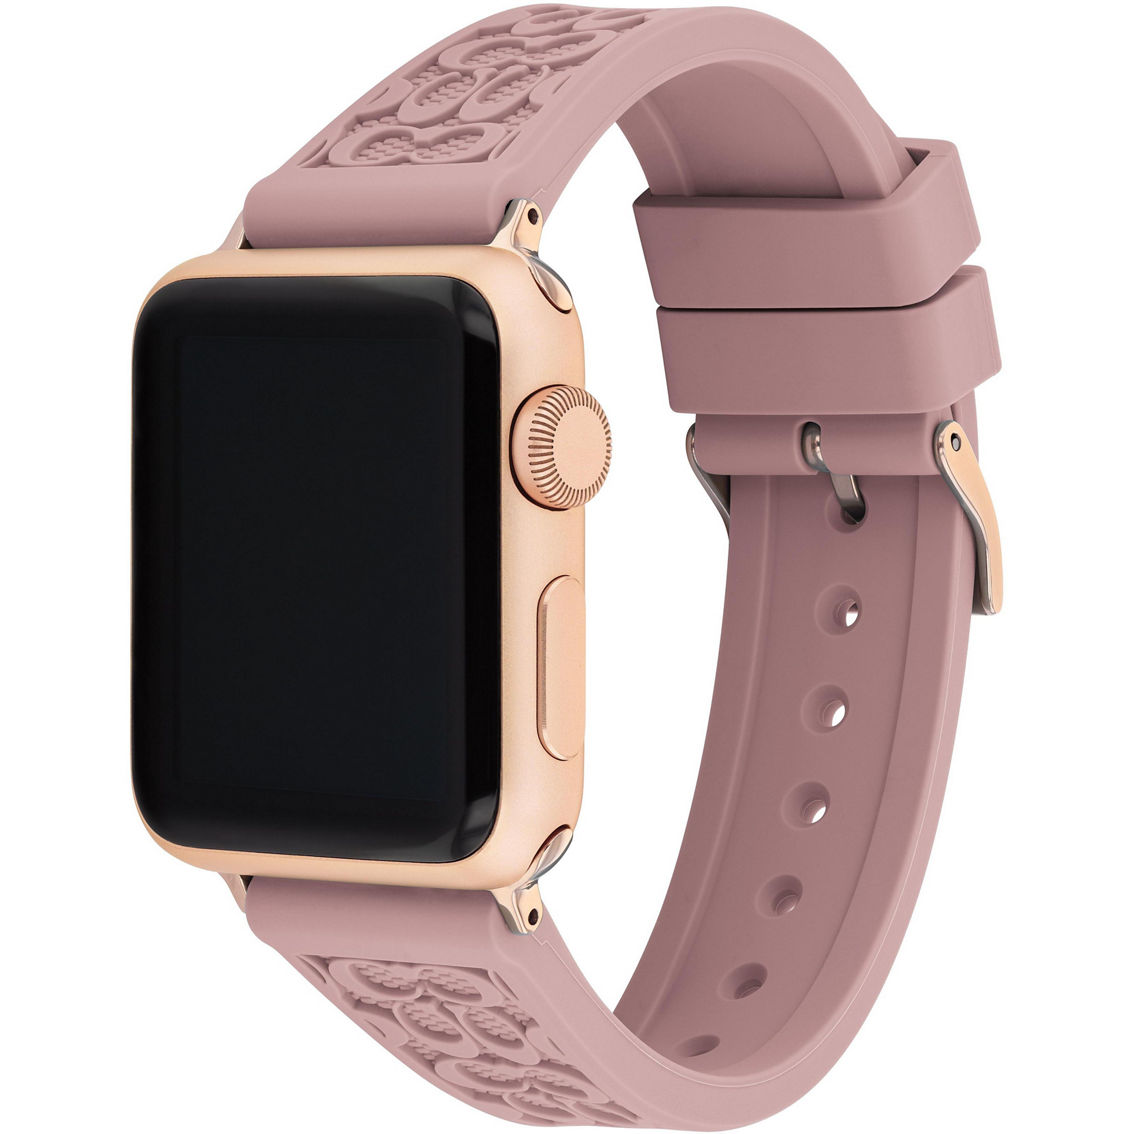 COACH Women's 38-40mm Signature Silicone Apple Watch Strap - Image 4 of 4